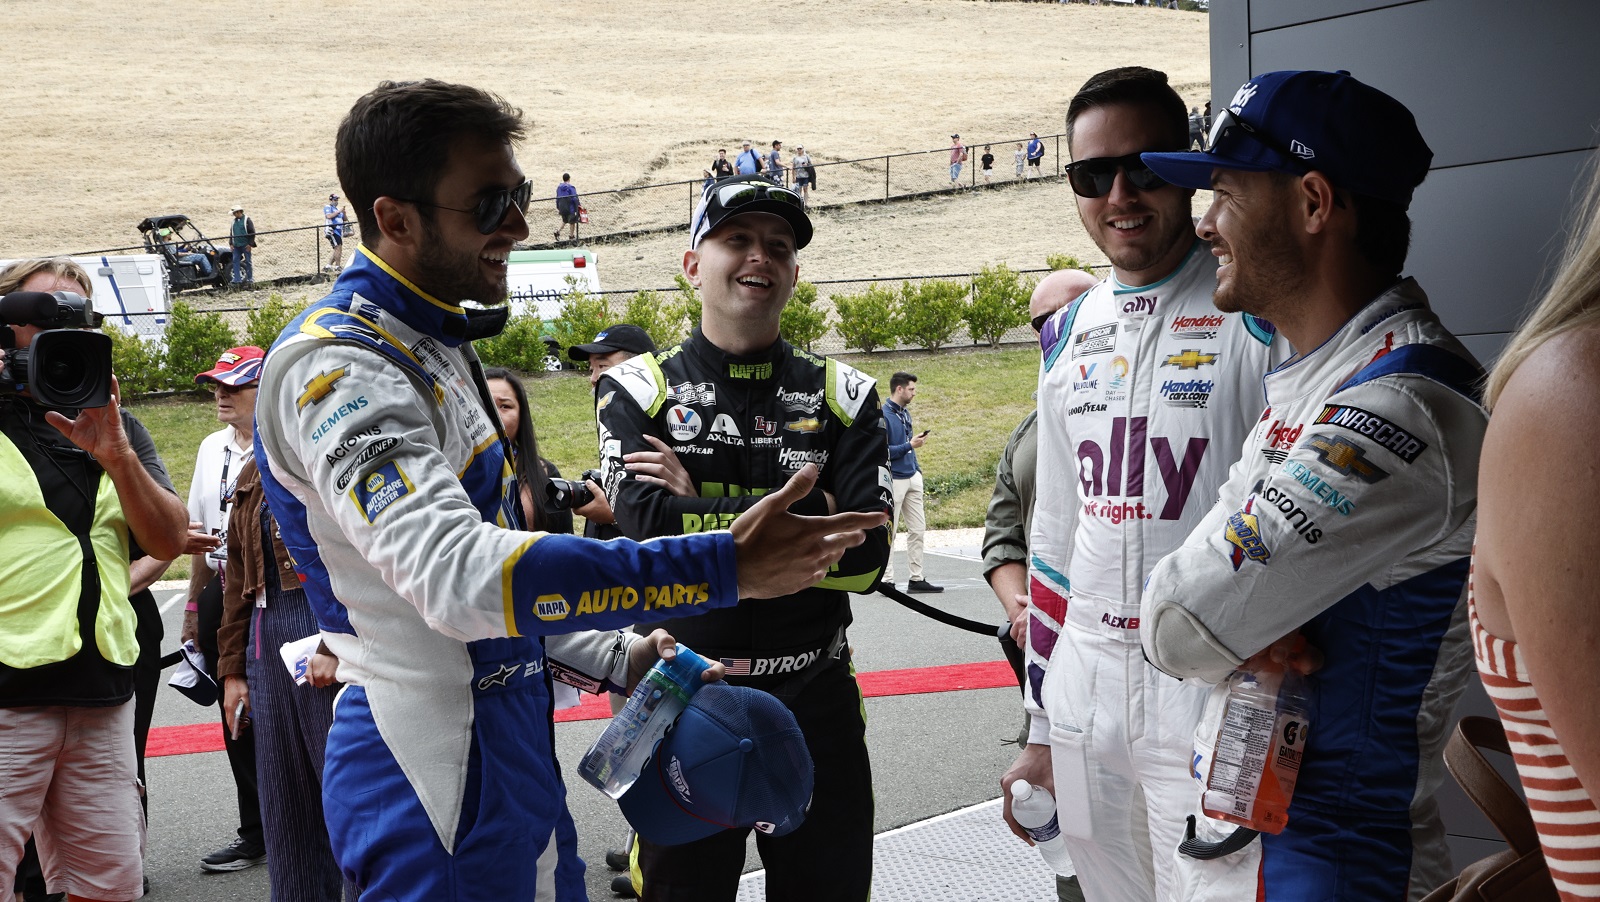 Chase Elliott William Byron, Alex Bowman, and Kyle Larson share a laugh at the 1948 Club prior to the NASCAR Cup Series Toyota/Save Mart 350 at Sonoma Raceway on June 12, 2022. | Chris Graythen/Getty Images